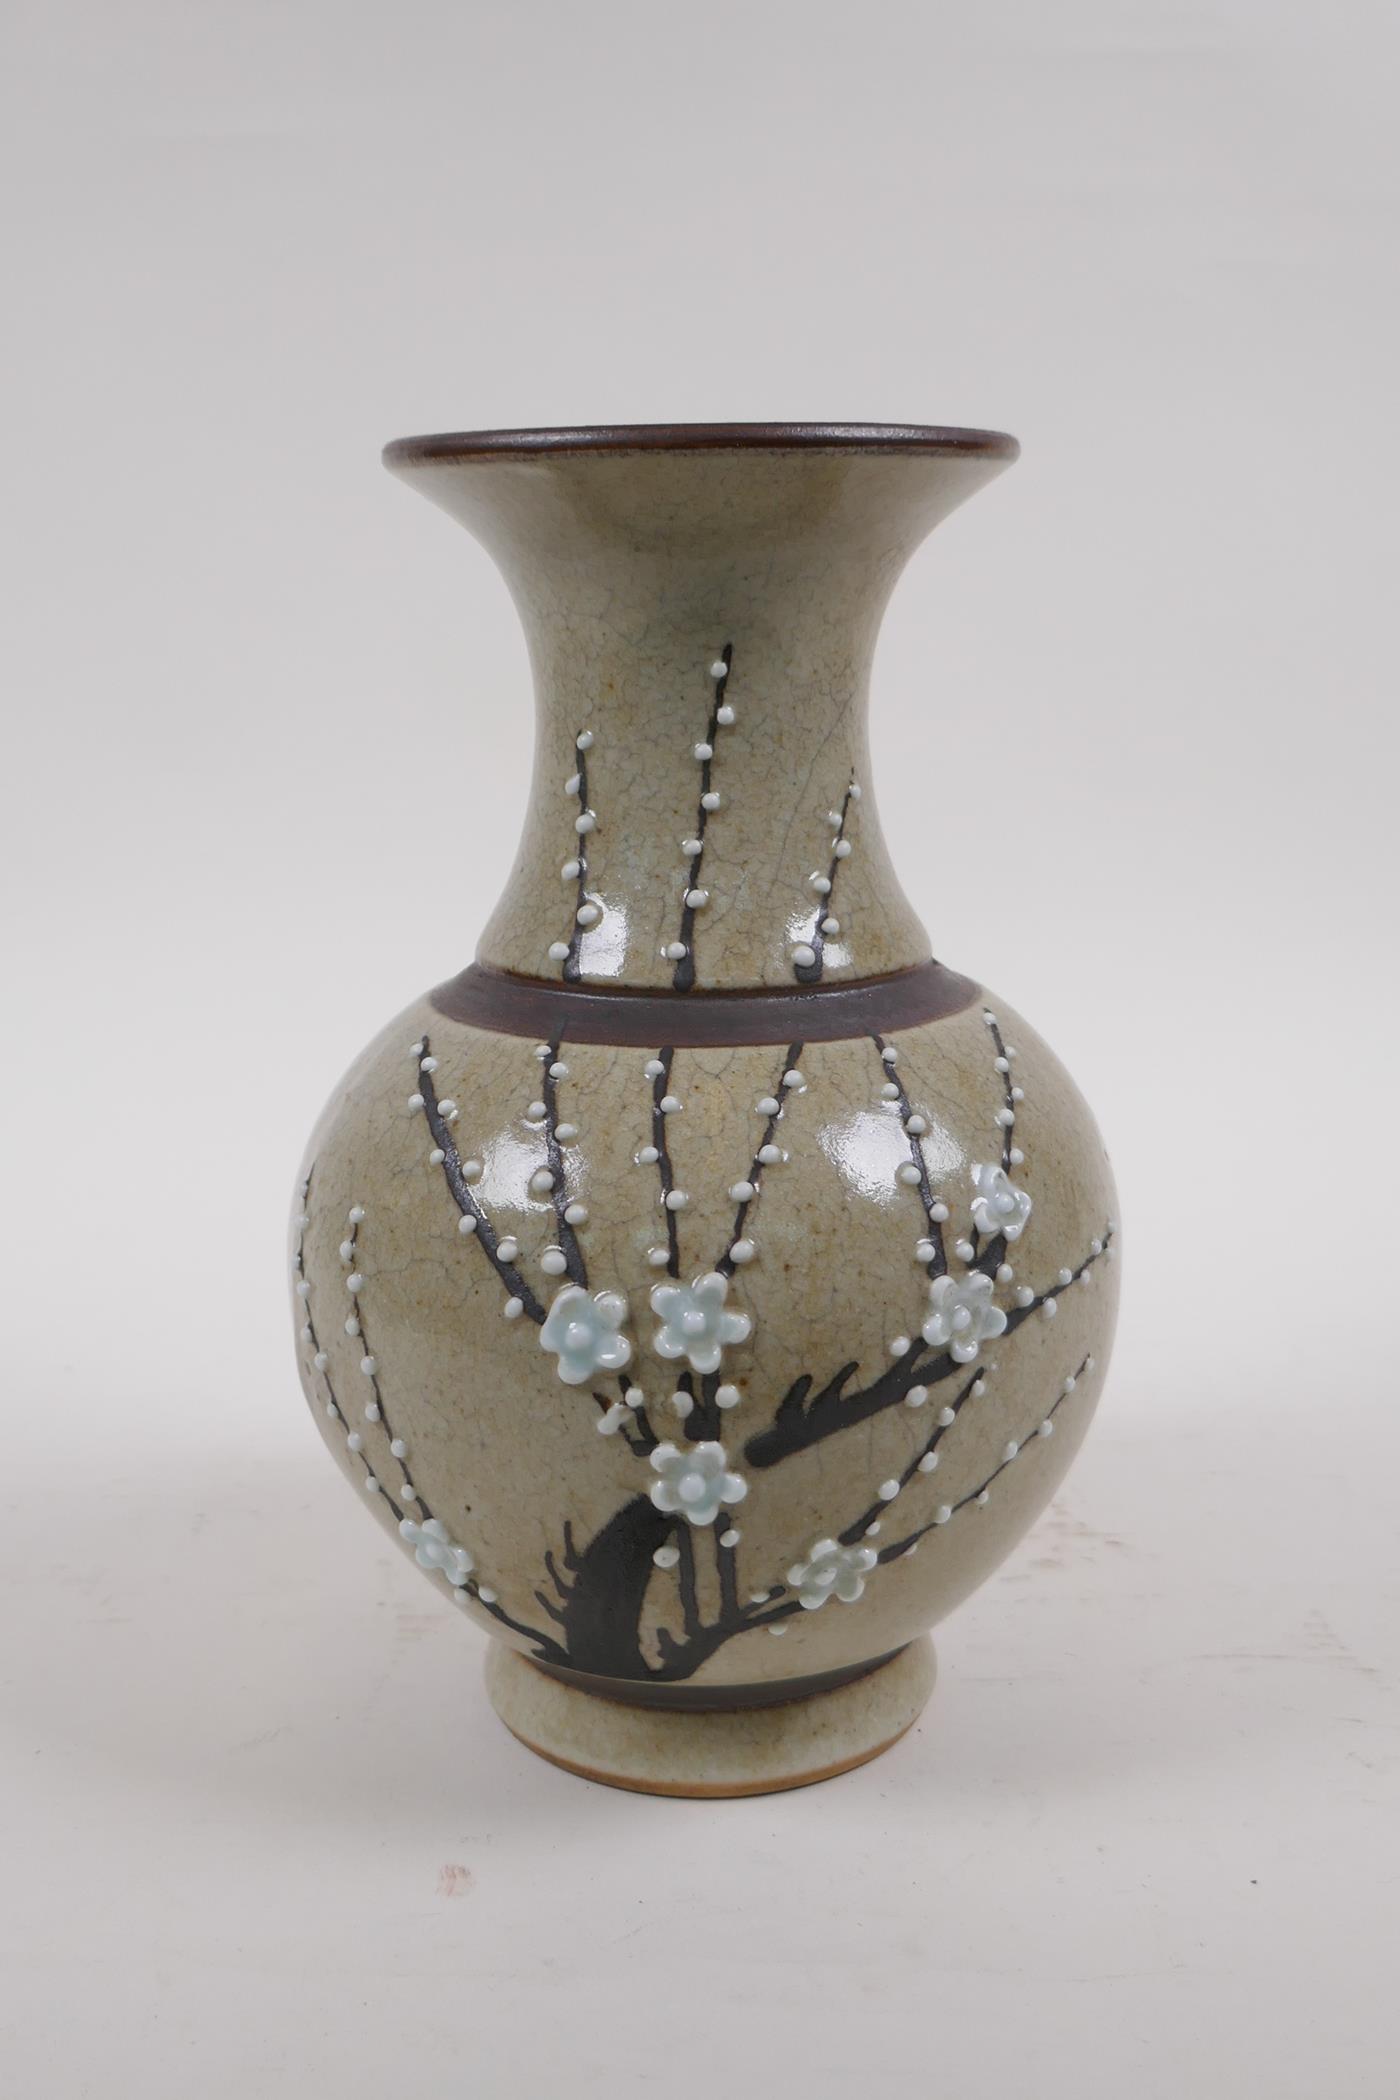 A Chinese celadon glazed porcelain vase with bronze style bands and prunus blossom decoration,